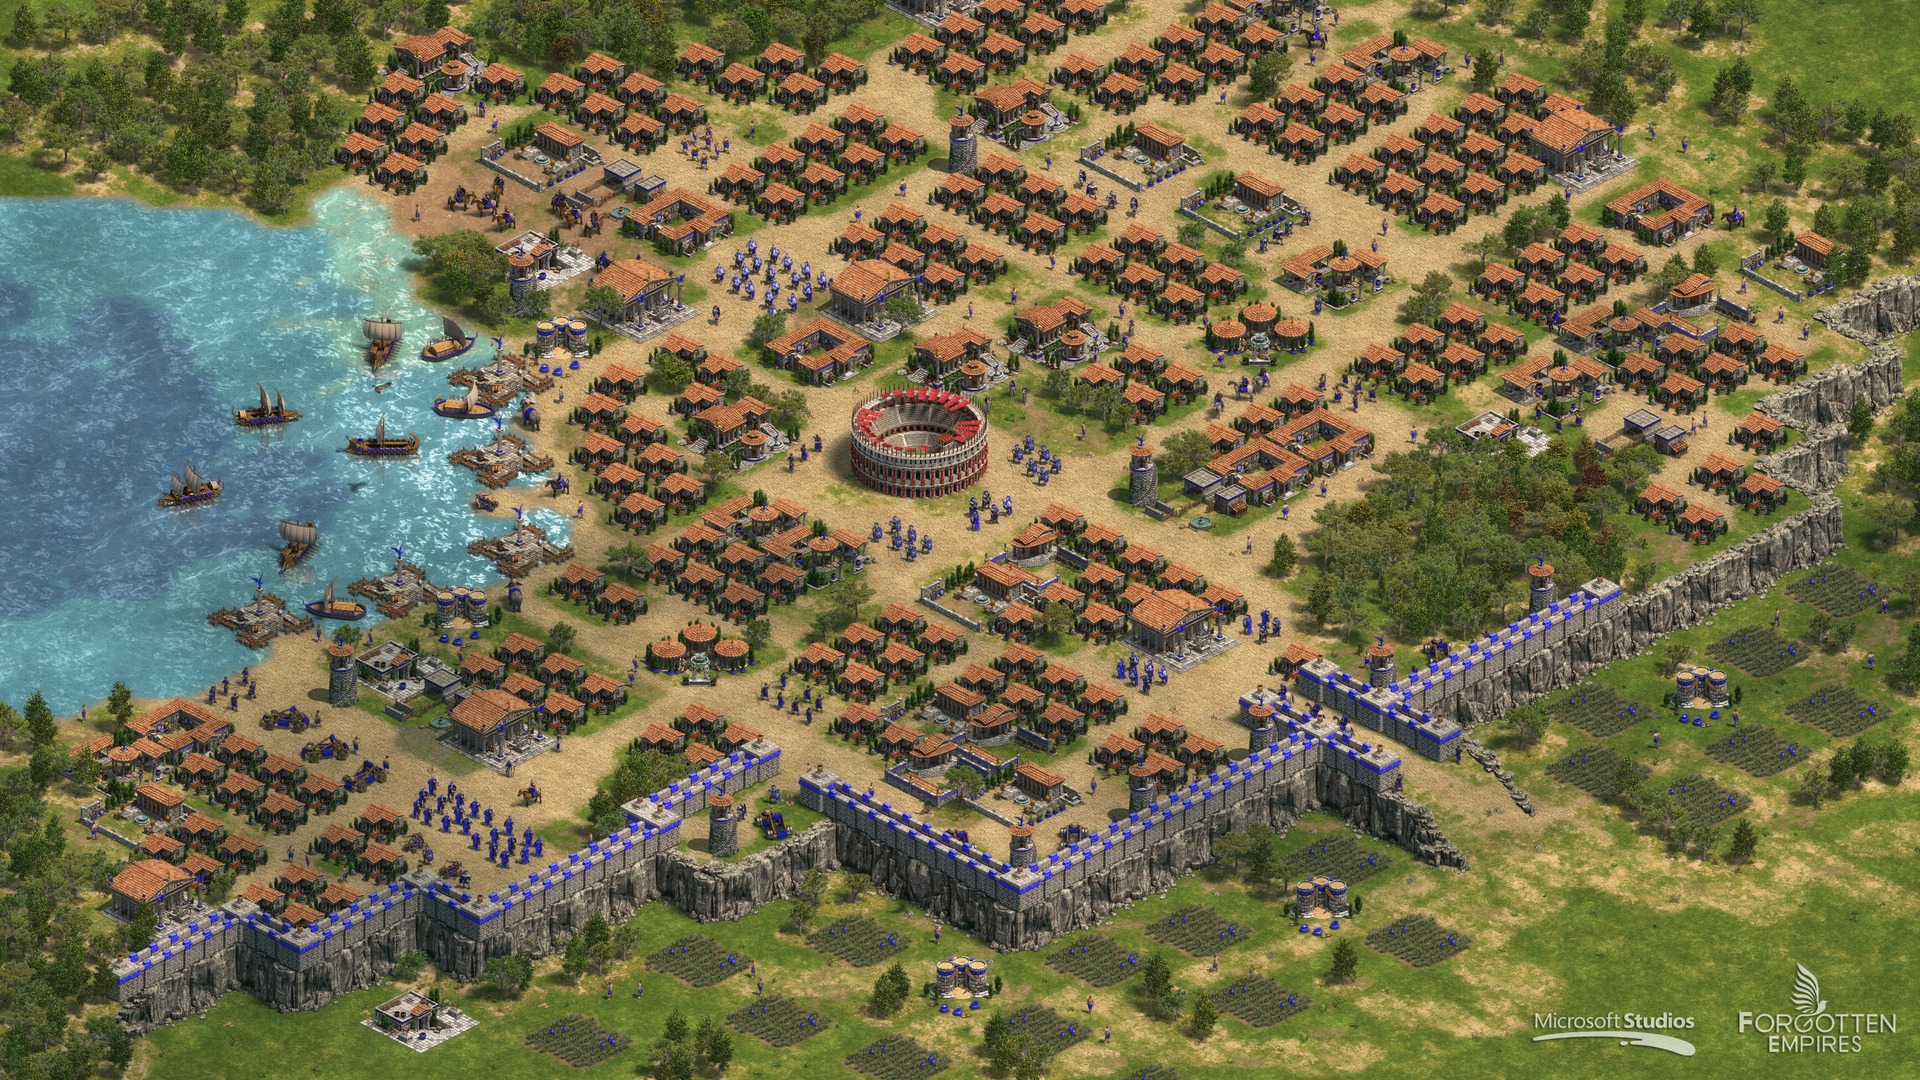 age of empires 3 mac download full